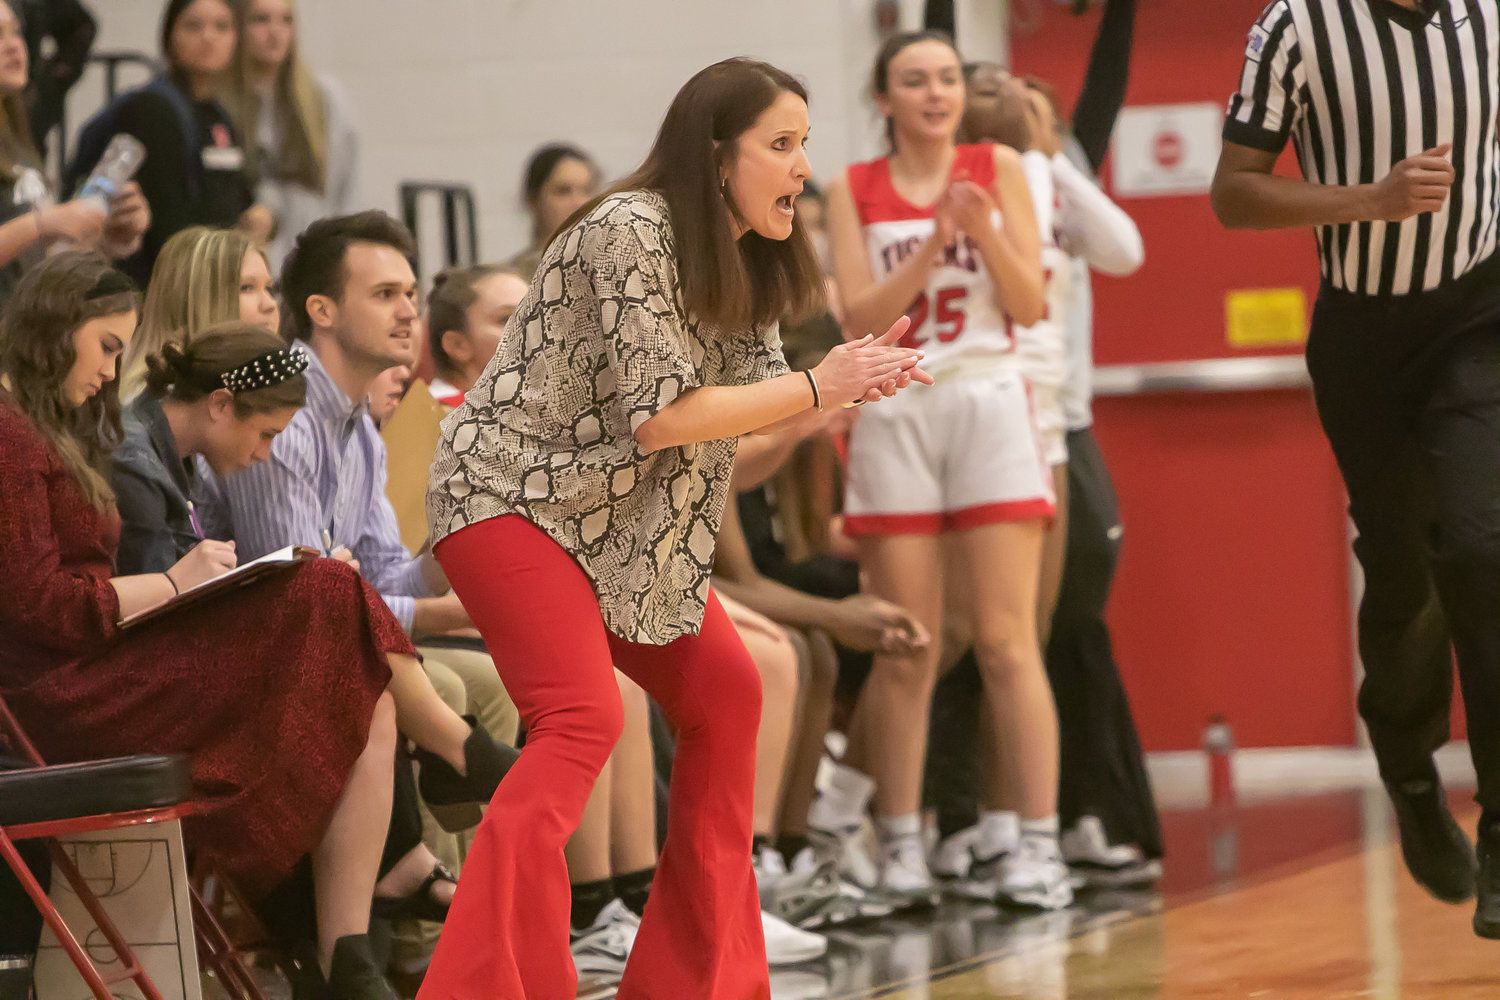 Katy head coach Shanna Marhofer speaks to her team from the sideline during Tuesday's game between Katy and Tompkins at the Katy gym.